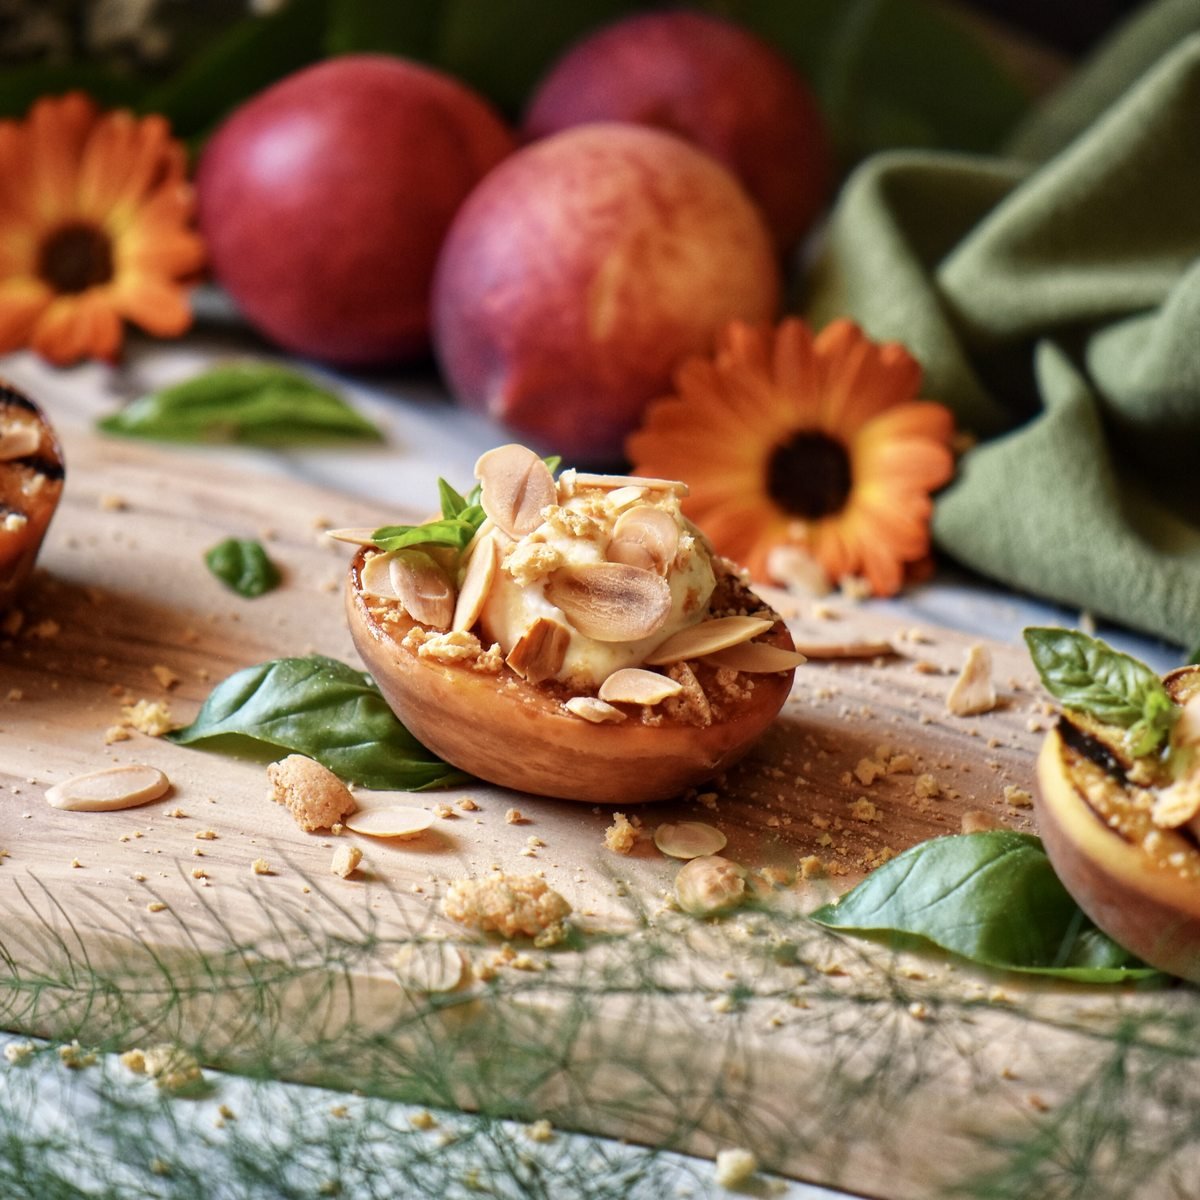 A grilled peach topped with ricotta, almonds and crushed amaretti cookies.